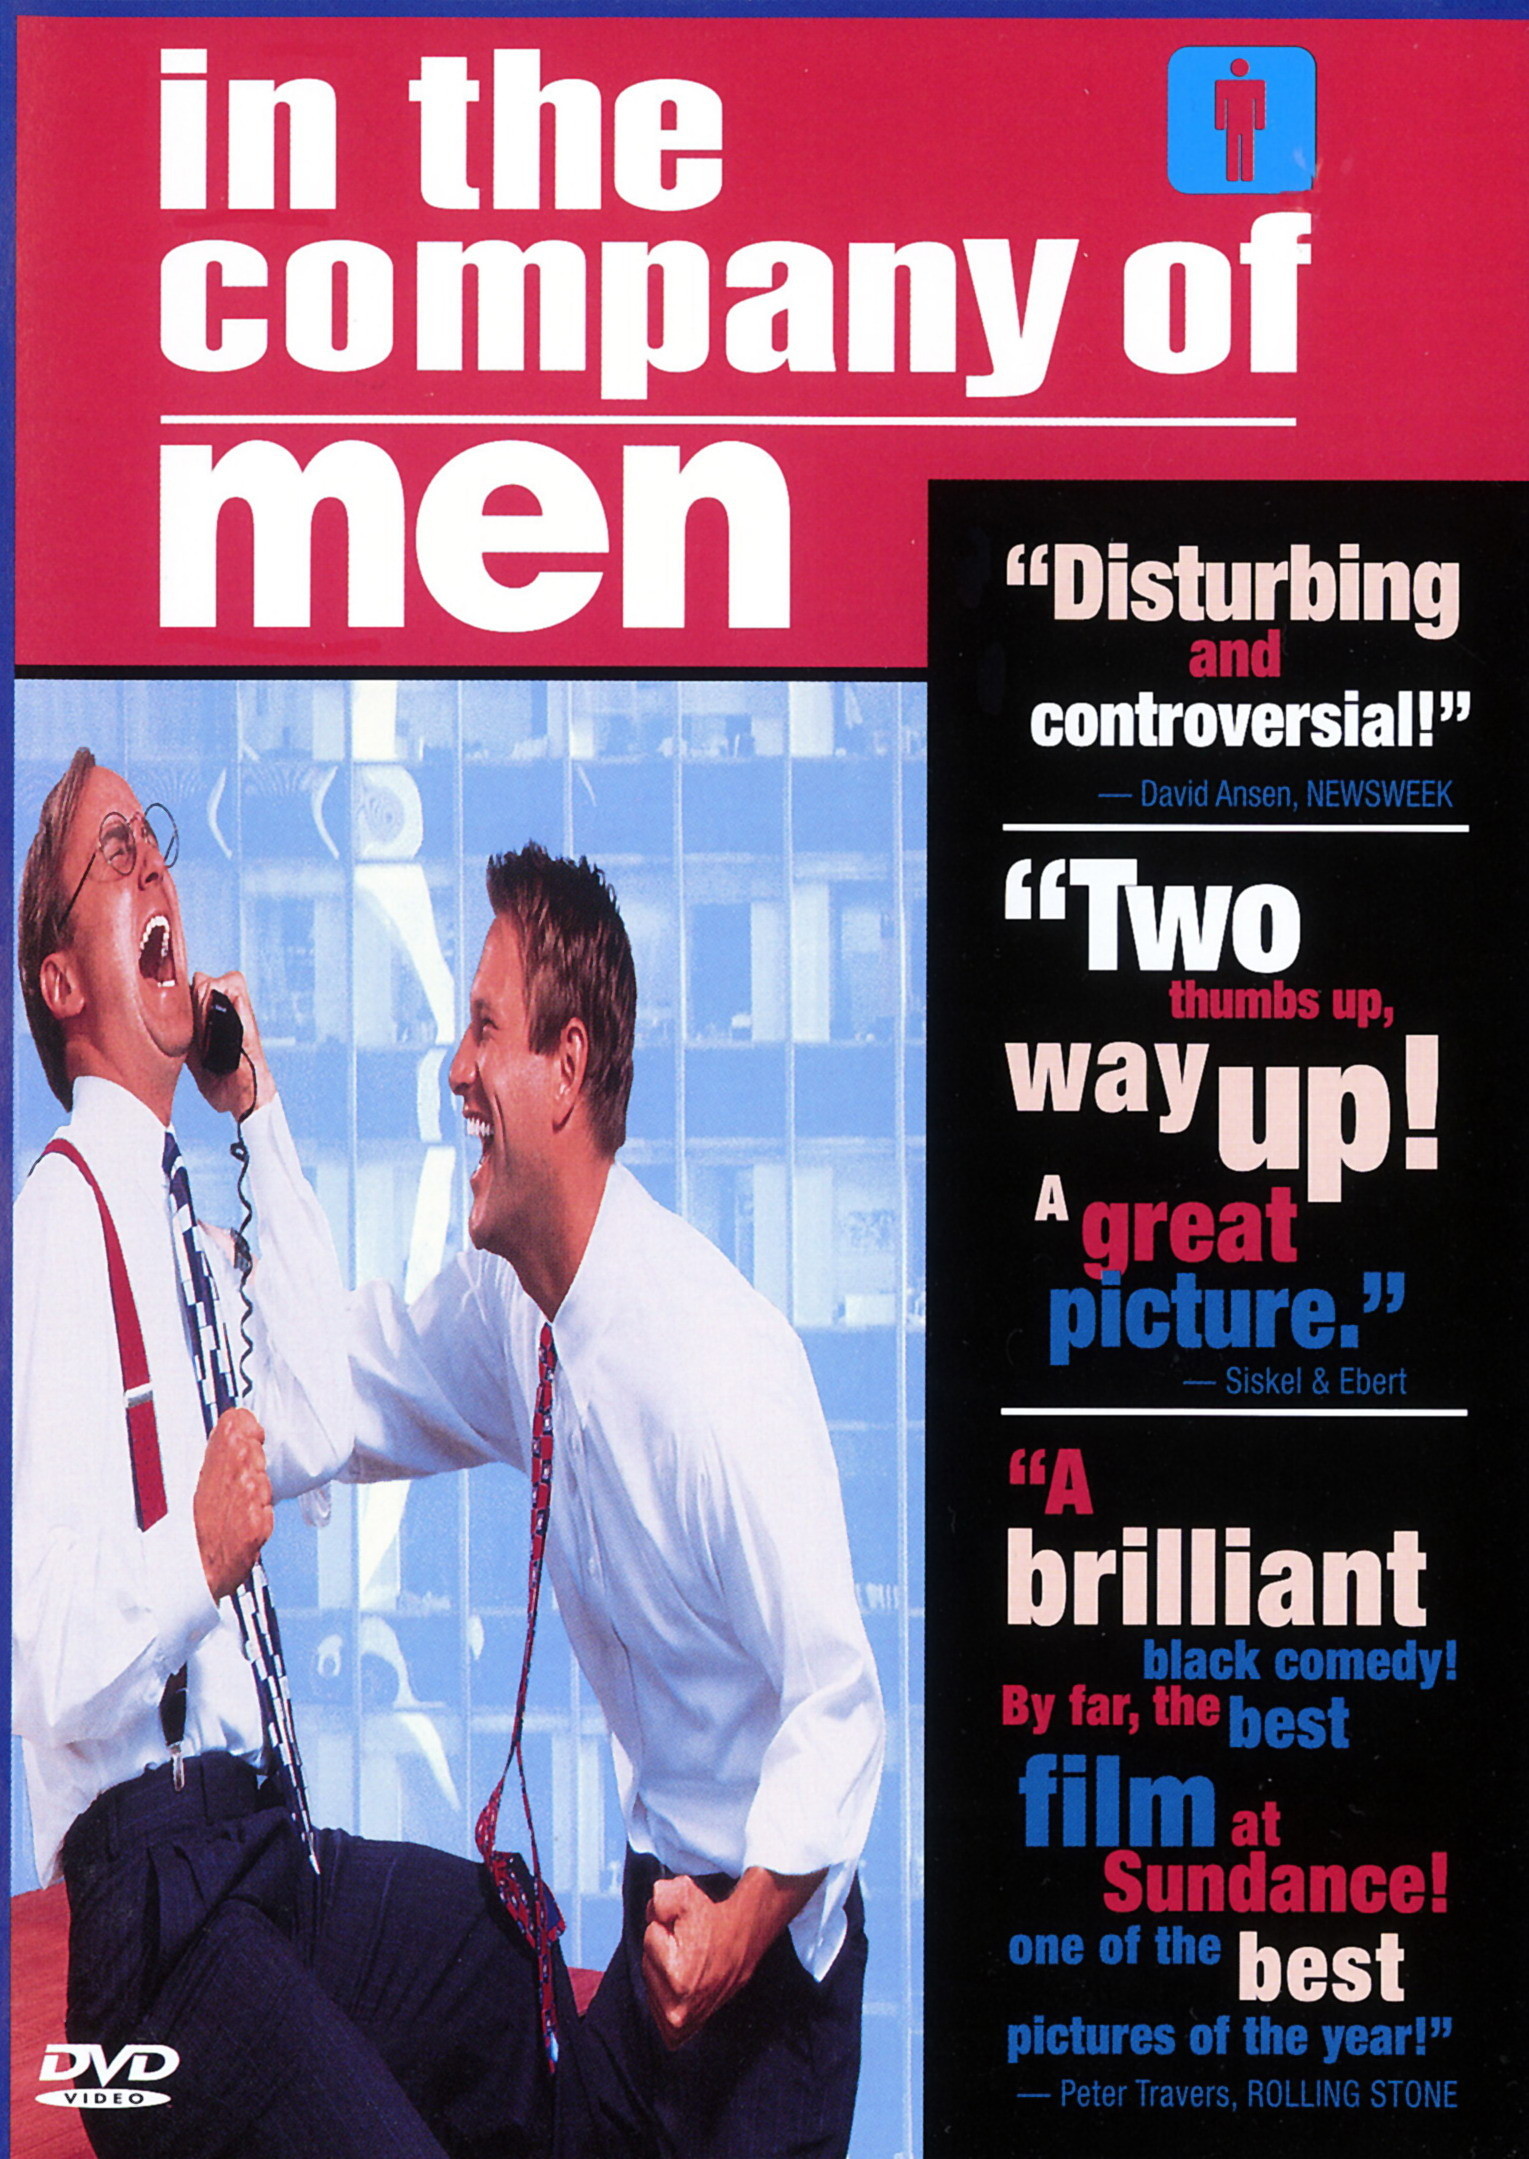 1-in-the-company-of-men